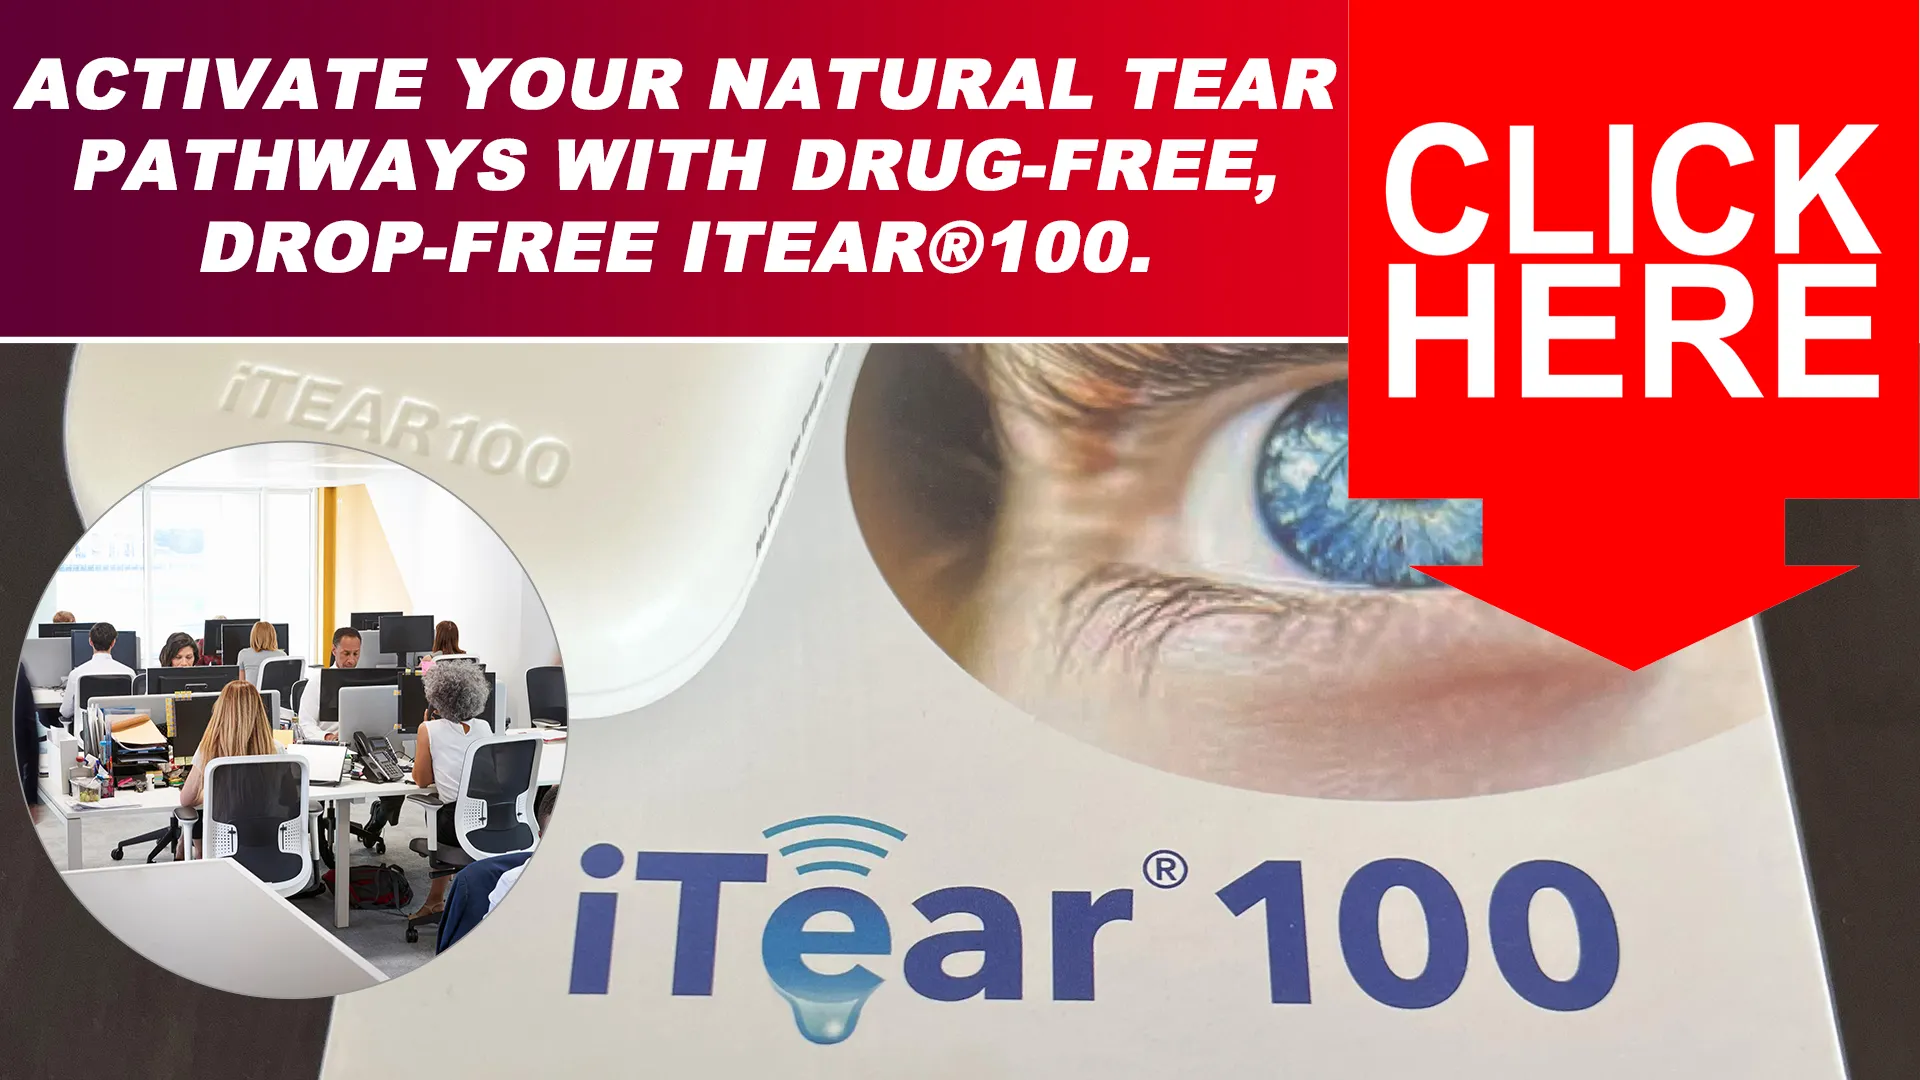 Getting Started with iTear100 Is a Breeze